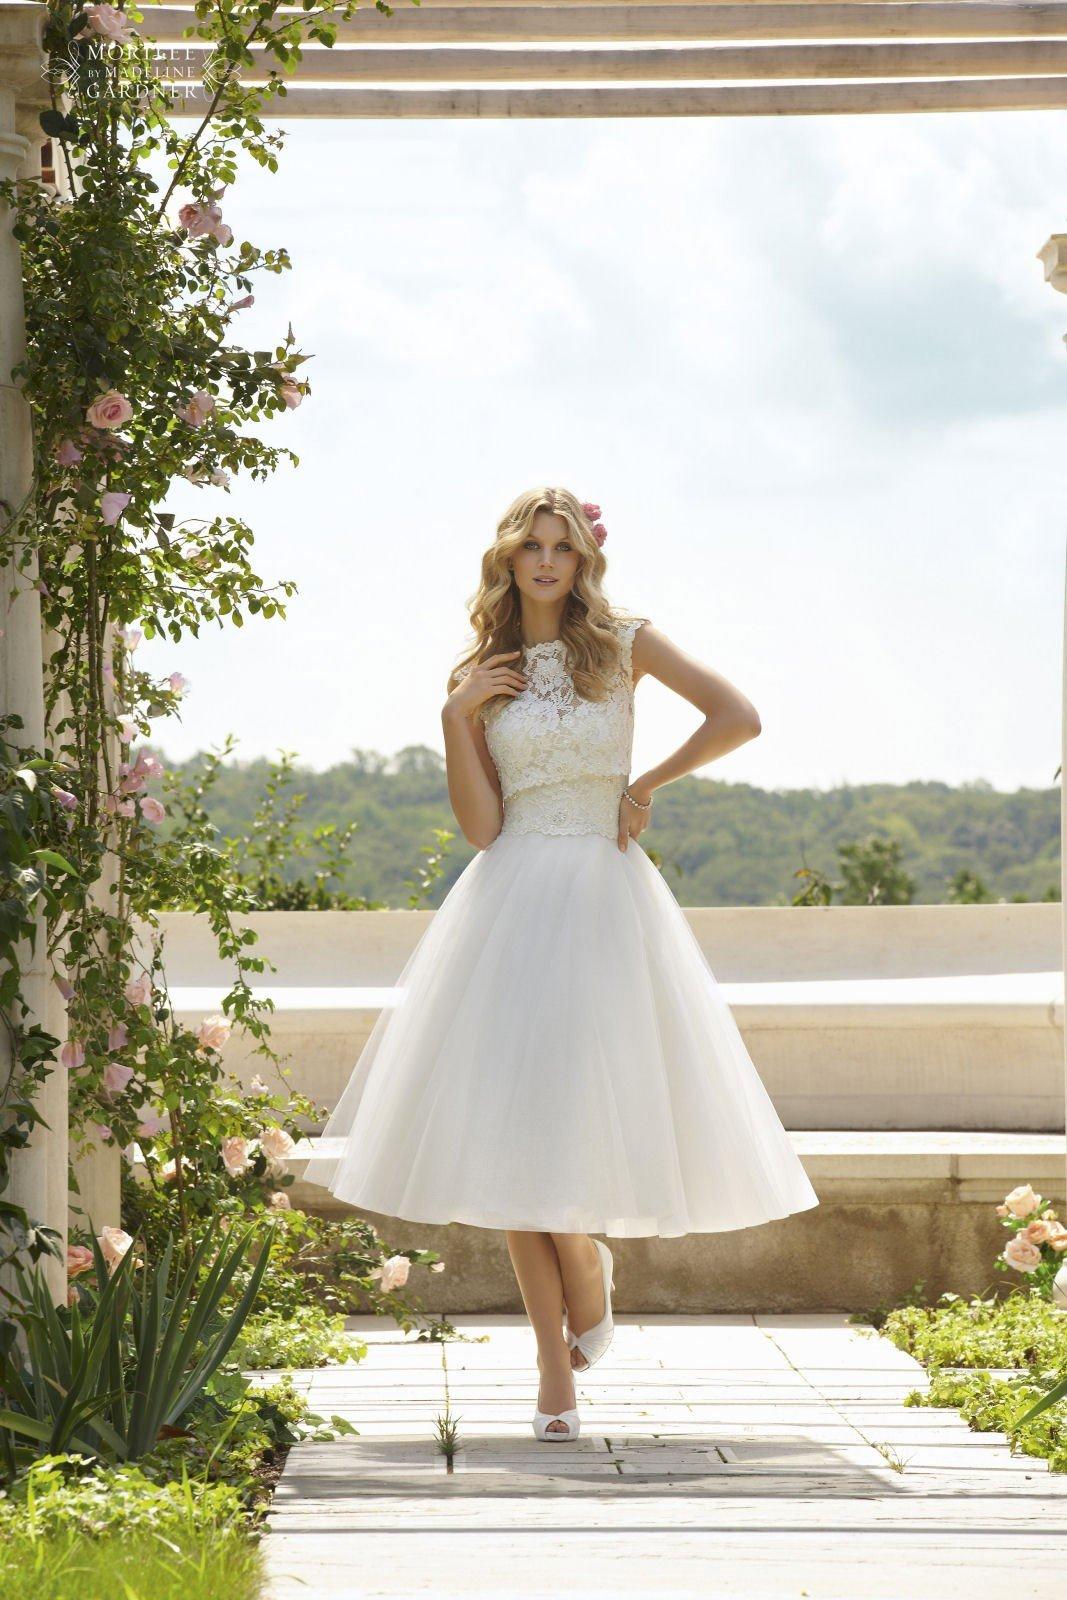 Our Favourite 1950s Inspired Wedding Dresses - hitched.co.uk - hitched ...